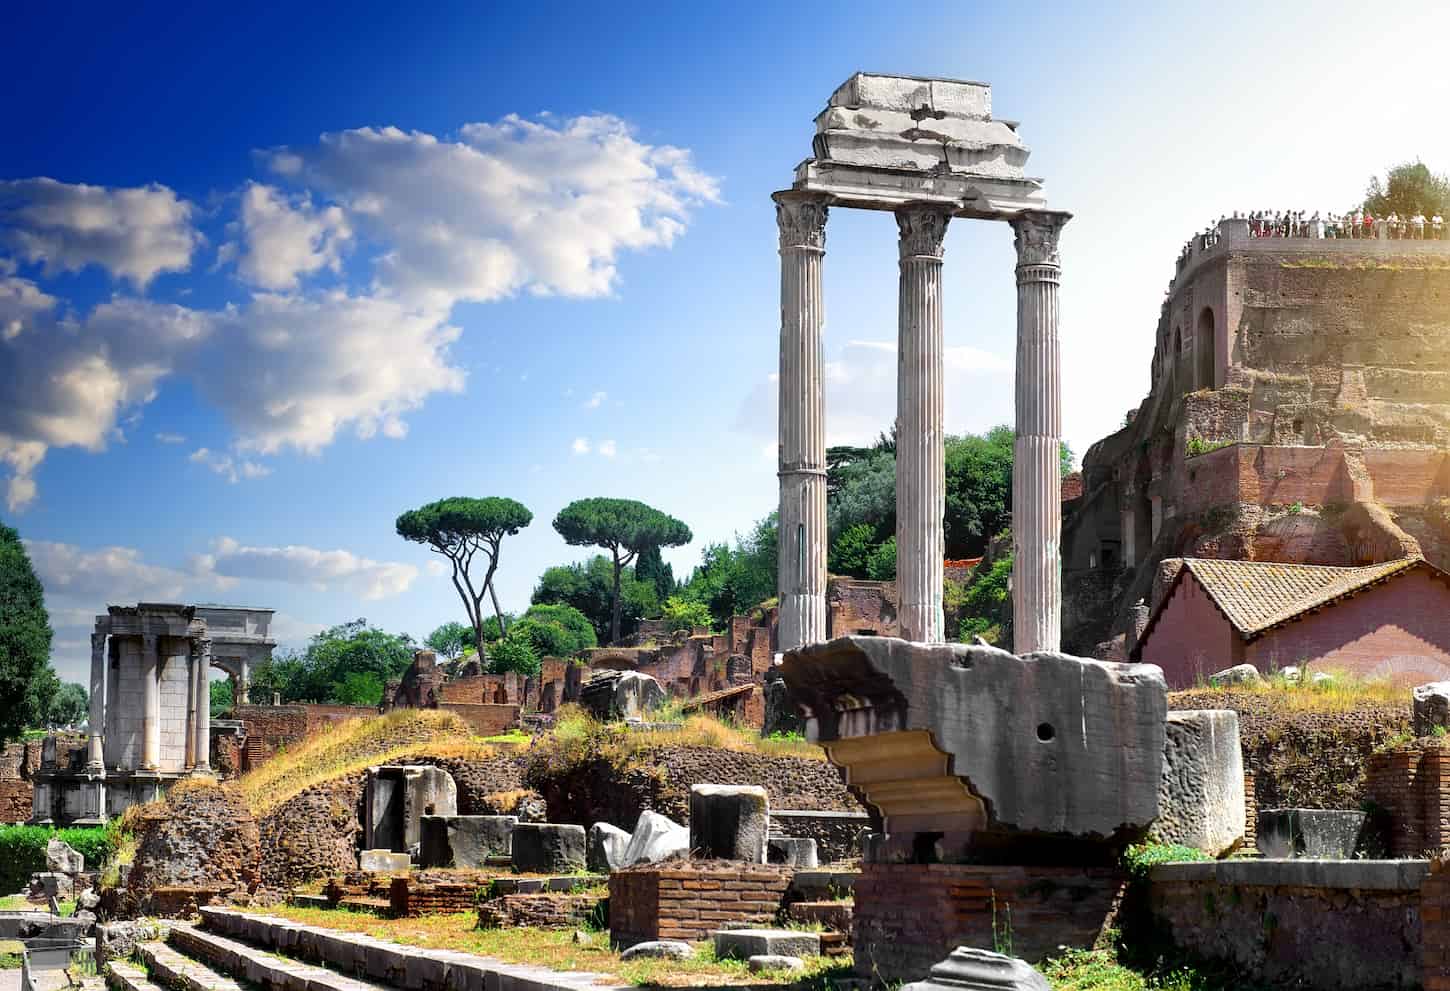 An image of Ruins of Roman Forum in summer, Italy.